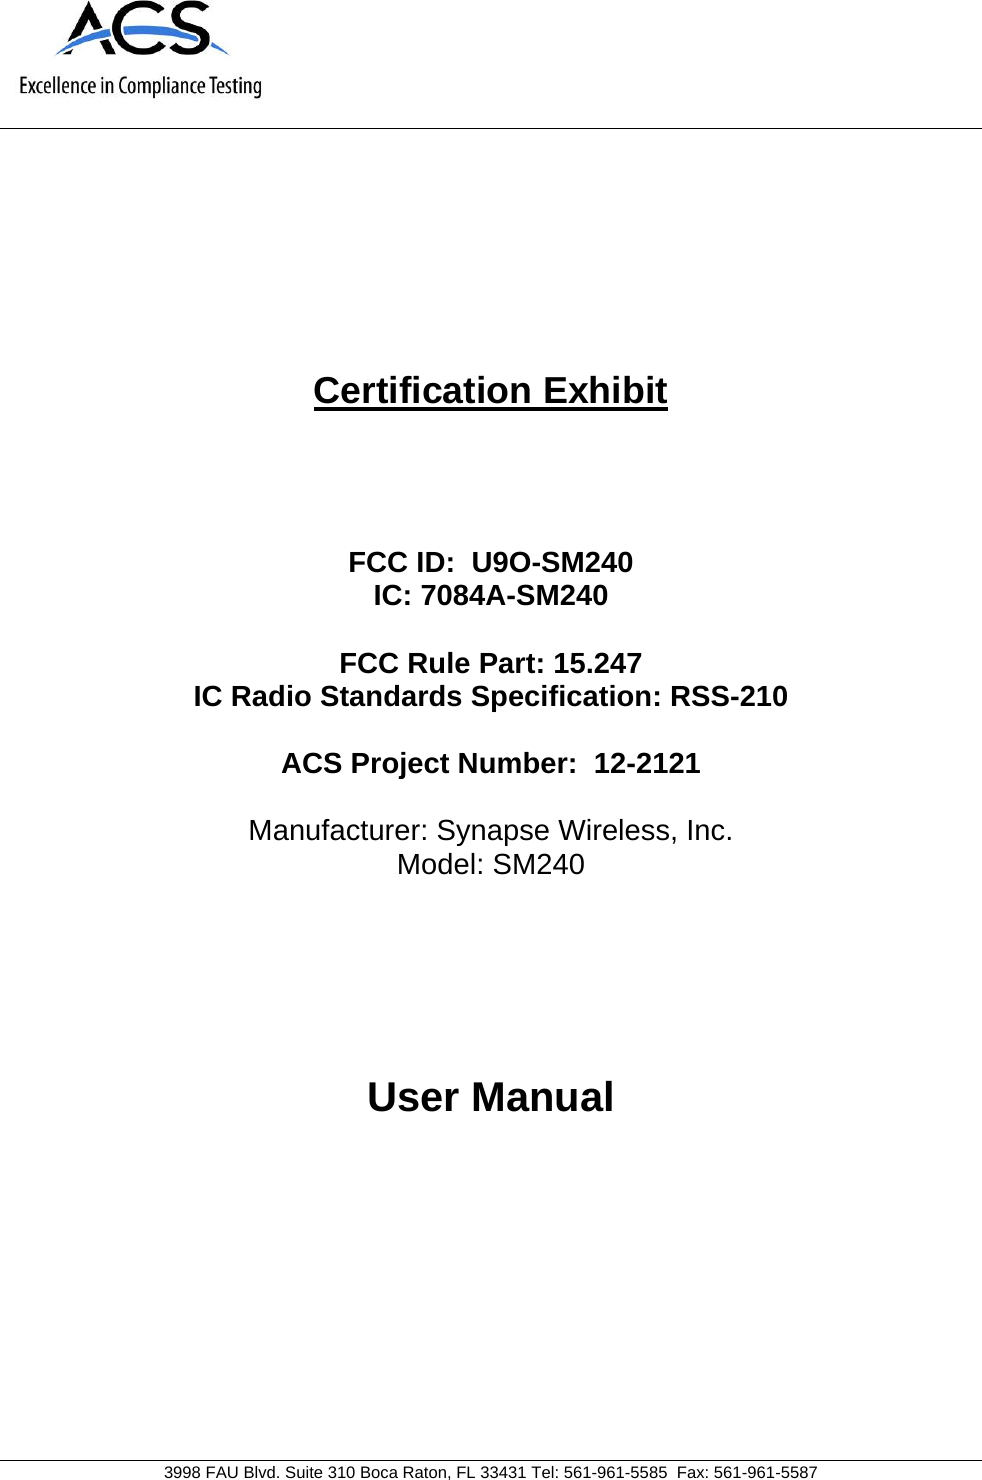     3998 FAU Blvd. Suite 310 Boca Raton, FL 33431 Tel: 561-961-5585  Fax: 561-961-5587 Certification Exhibit     FCC ID:  U9O-SM240 IC: 7084A-SM240  FCC Rule Part: 15.247 IC Radio Standards Specification: RSS-210  ACS Project Number:  12-2121   Manufacturer: Synapse Wireless, Inc. Model: SM240     User Manual   